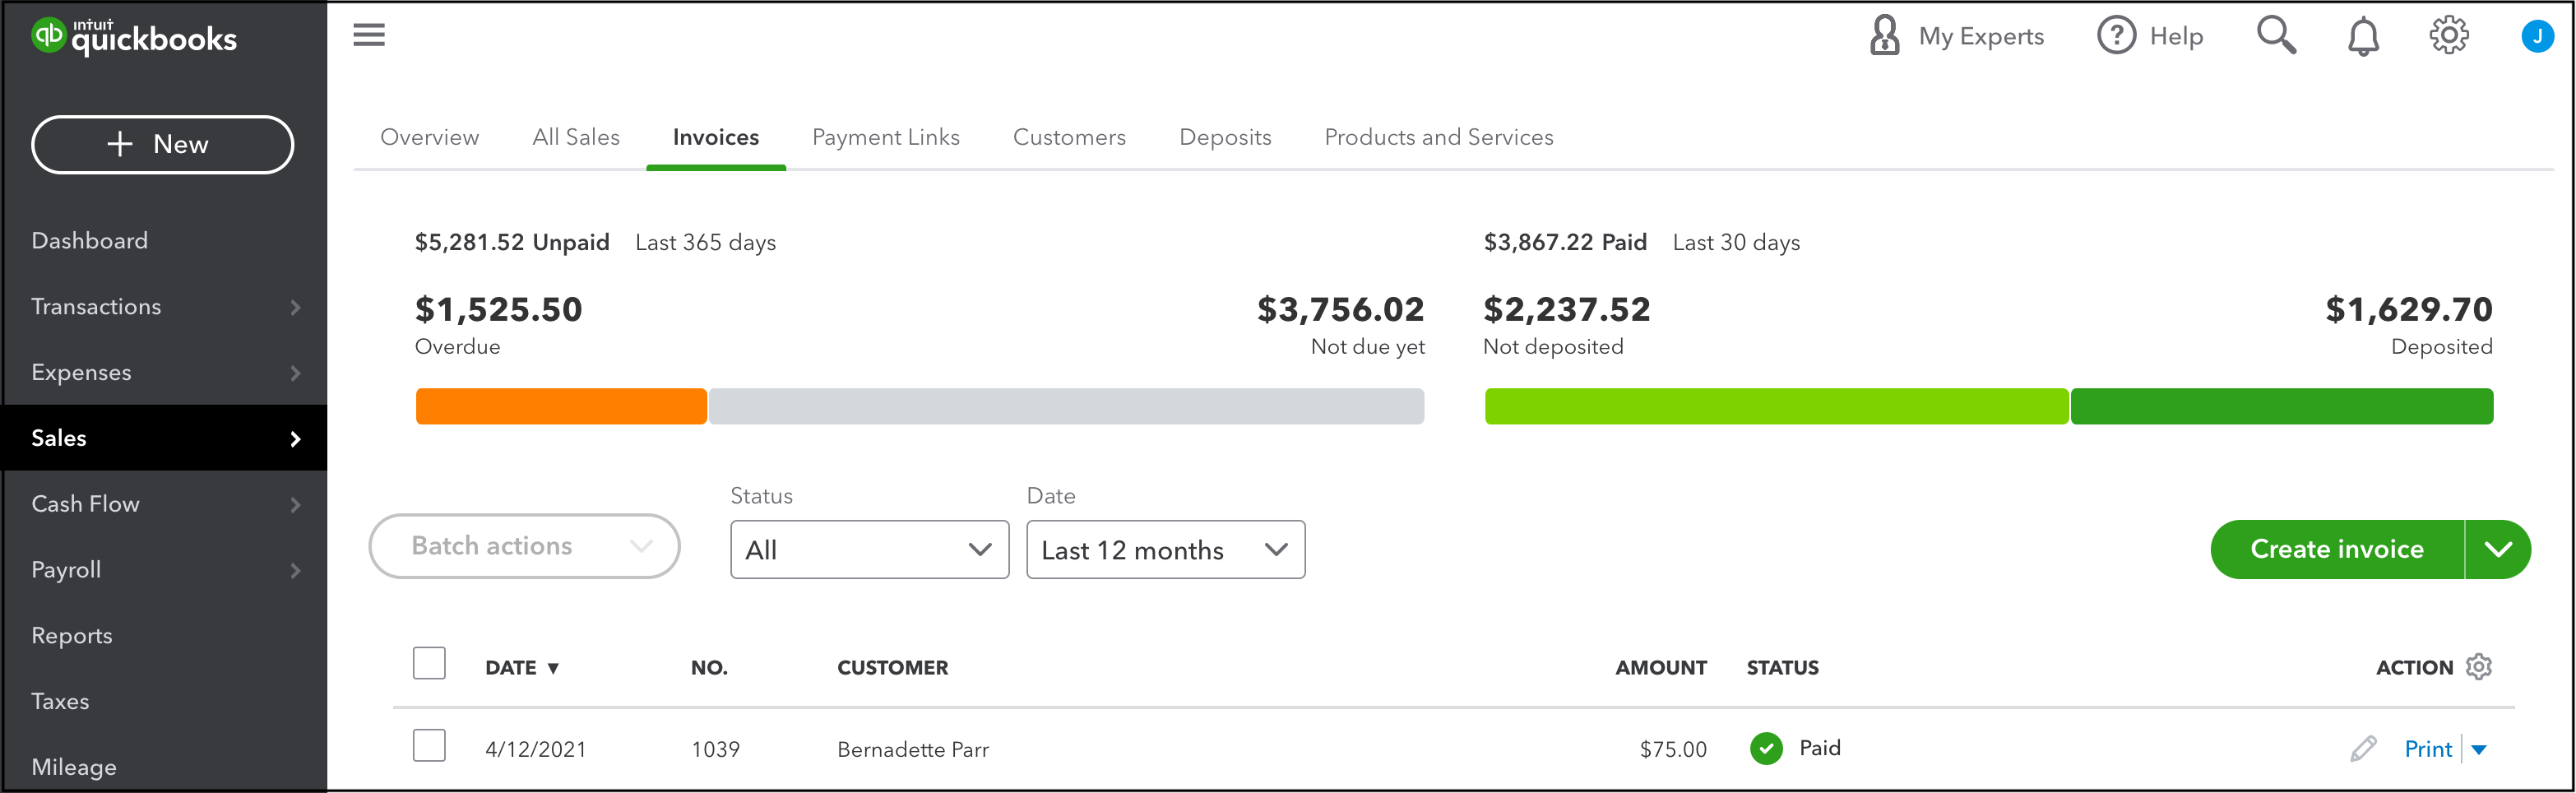 Quickbooks_View_Invoice_Sales.png